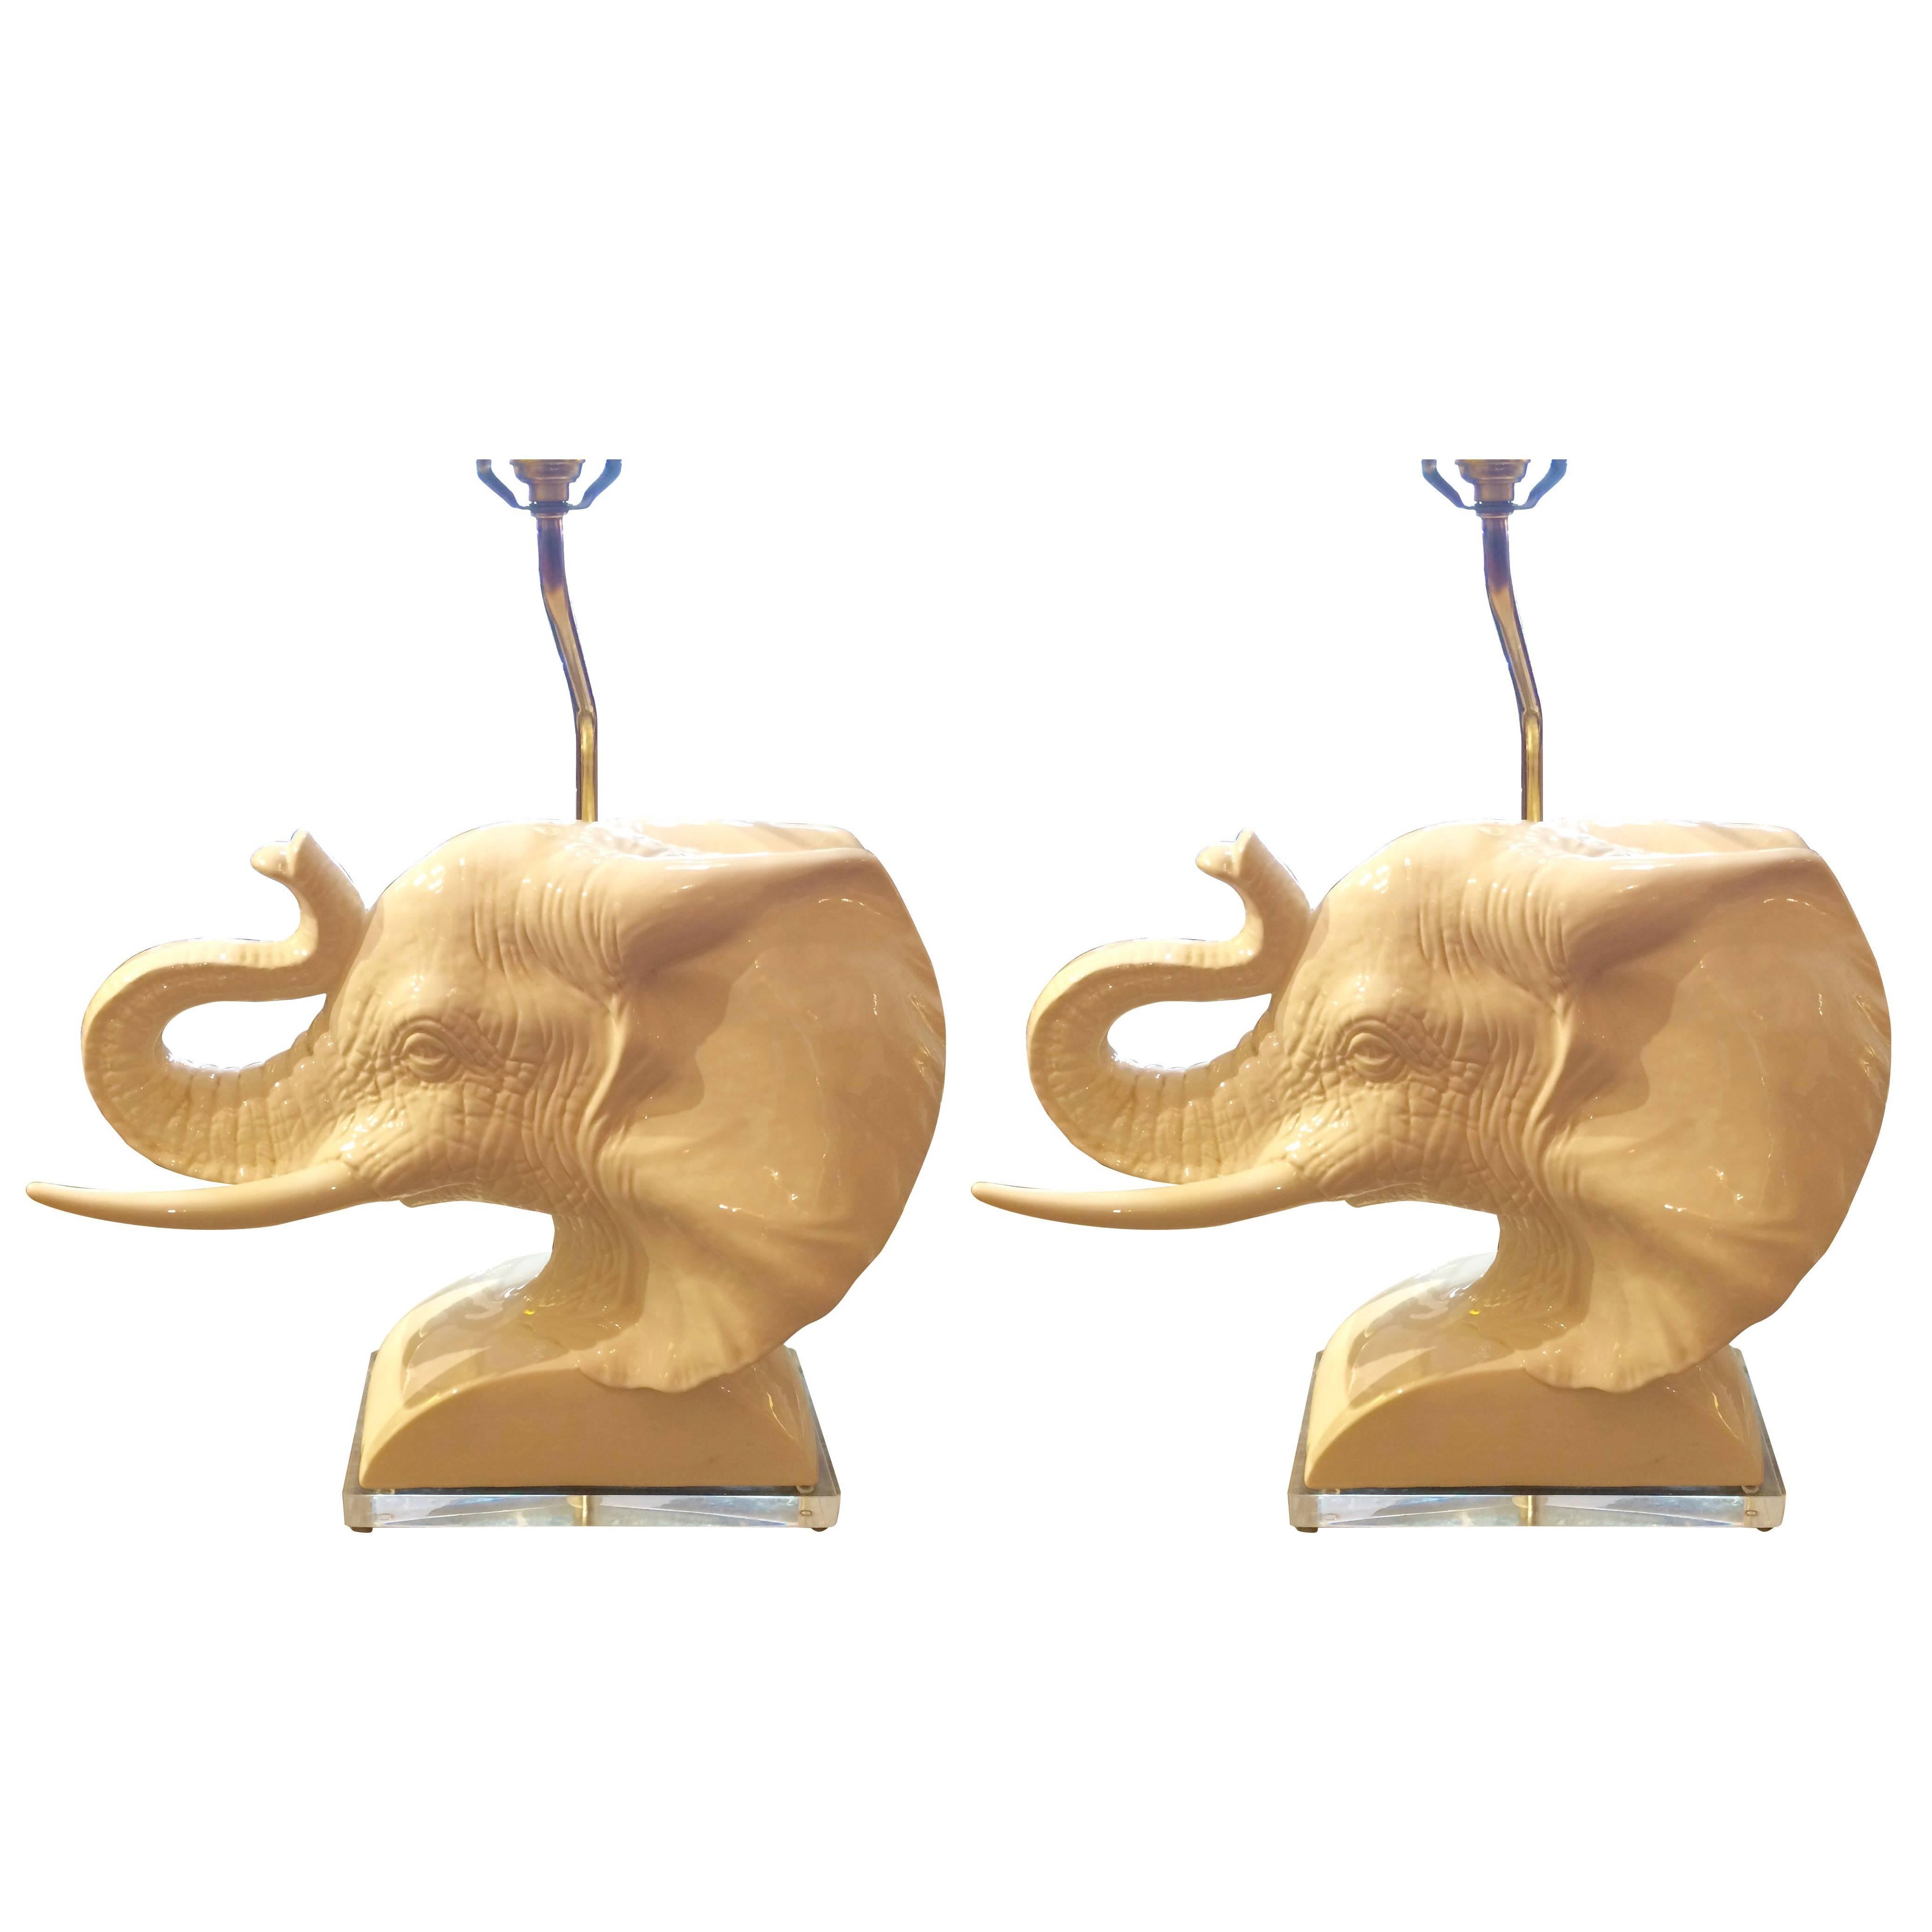 Pair of Sculptural Mid-Century Modern Ceramic Elephant Bust Table Lamps